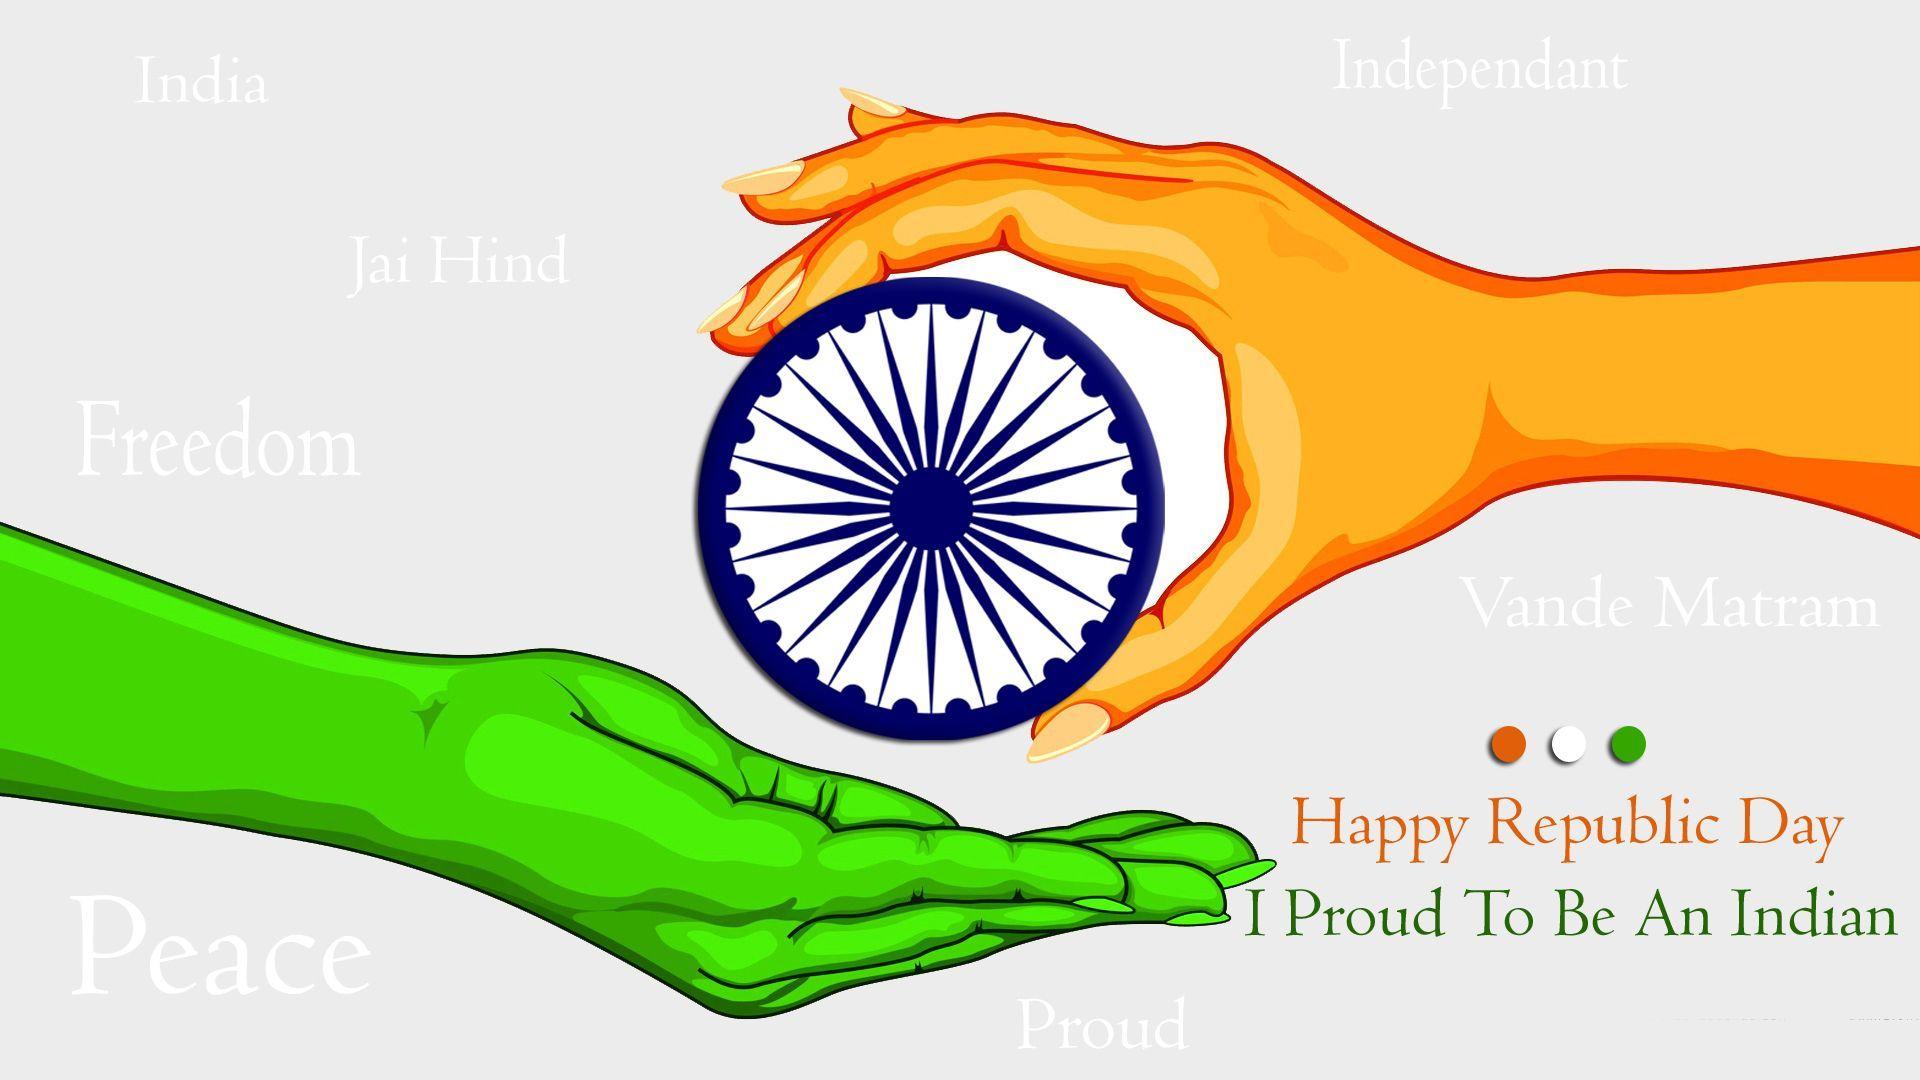 Proud To Be An Indian Wallpapers HD - Wallpaper Cave